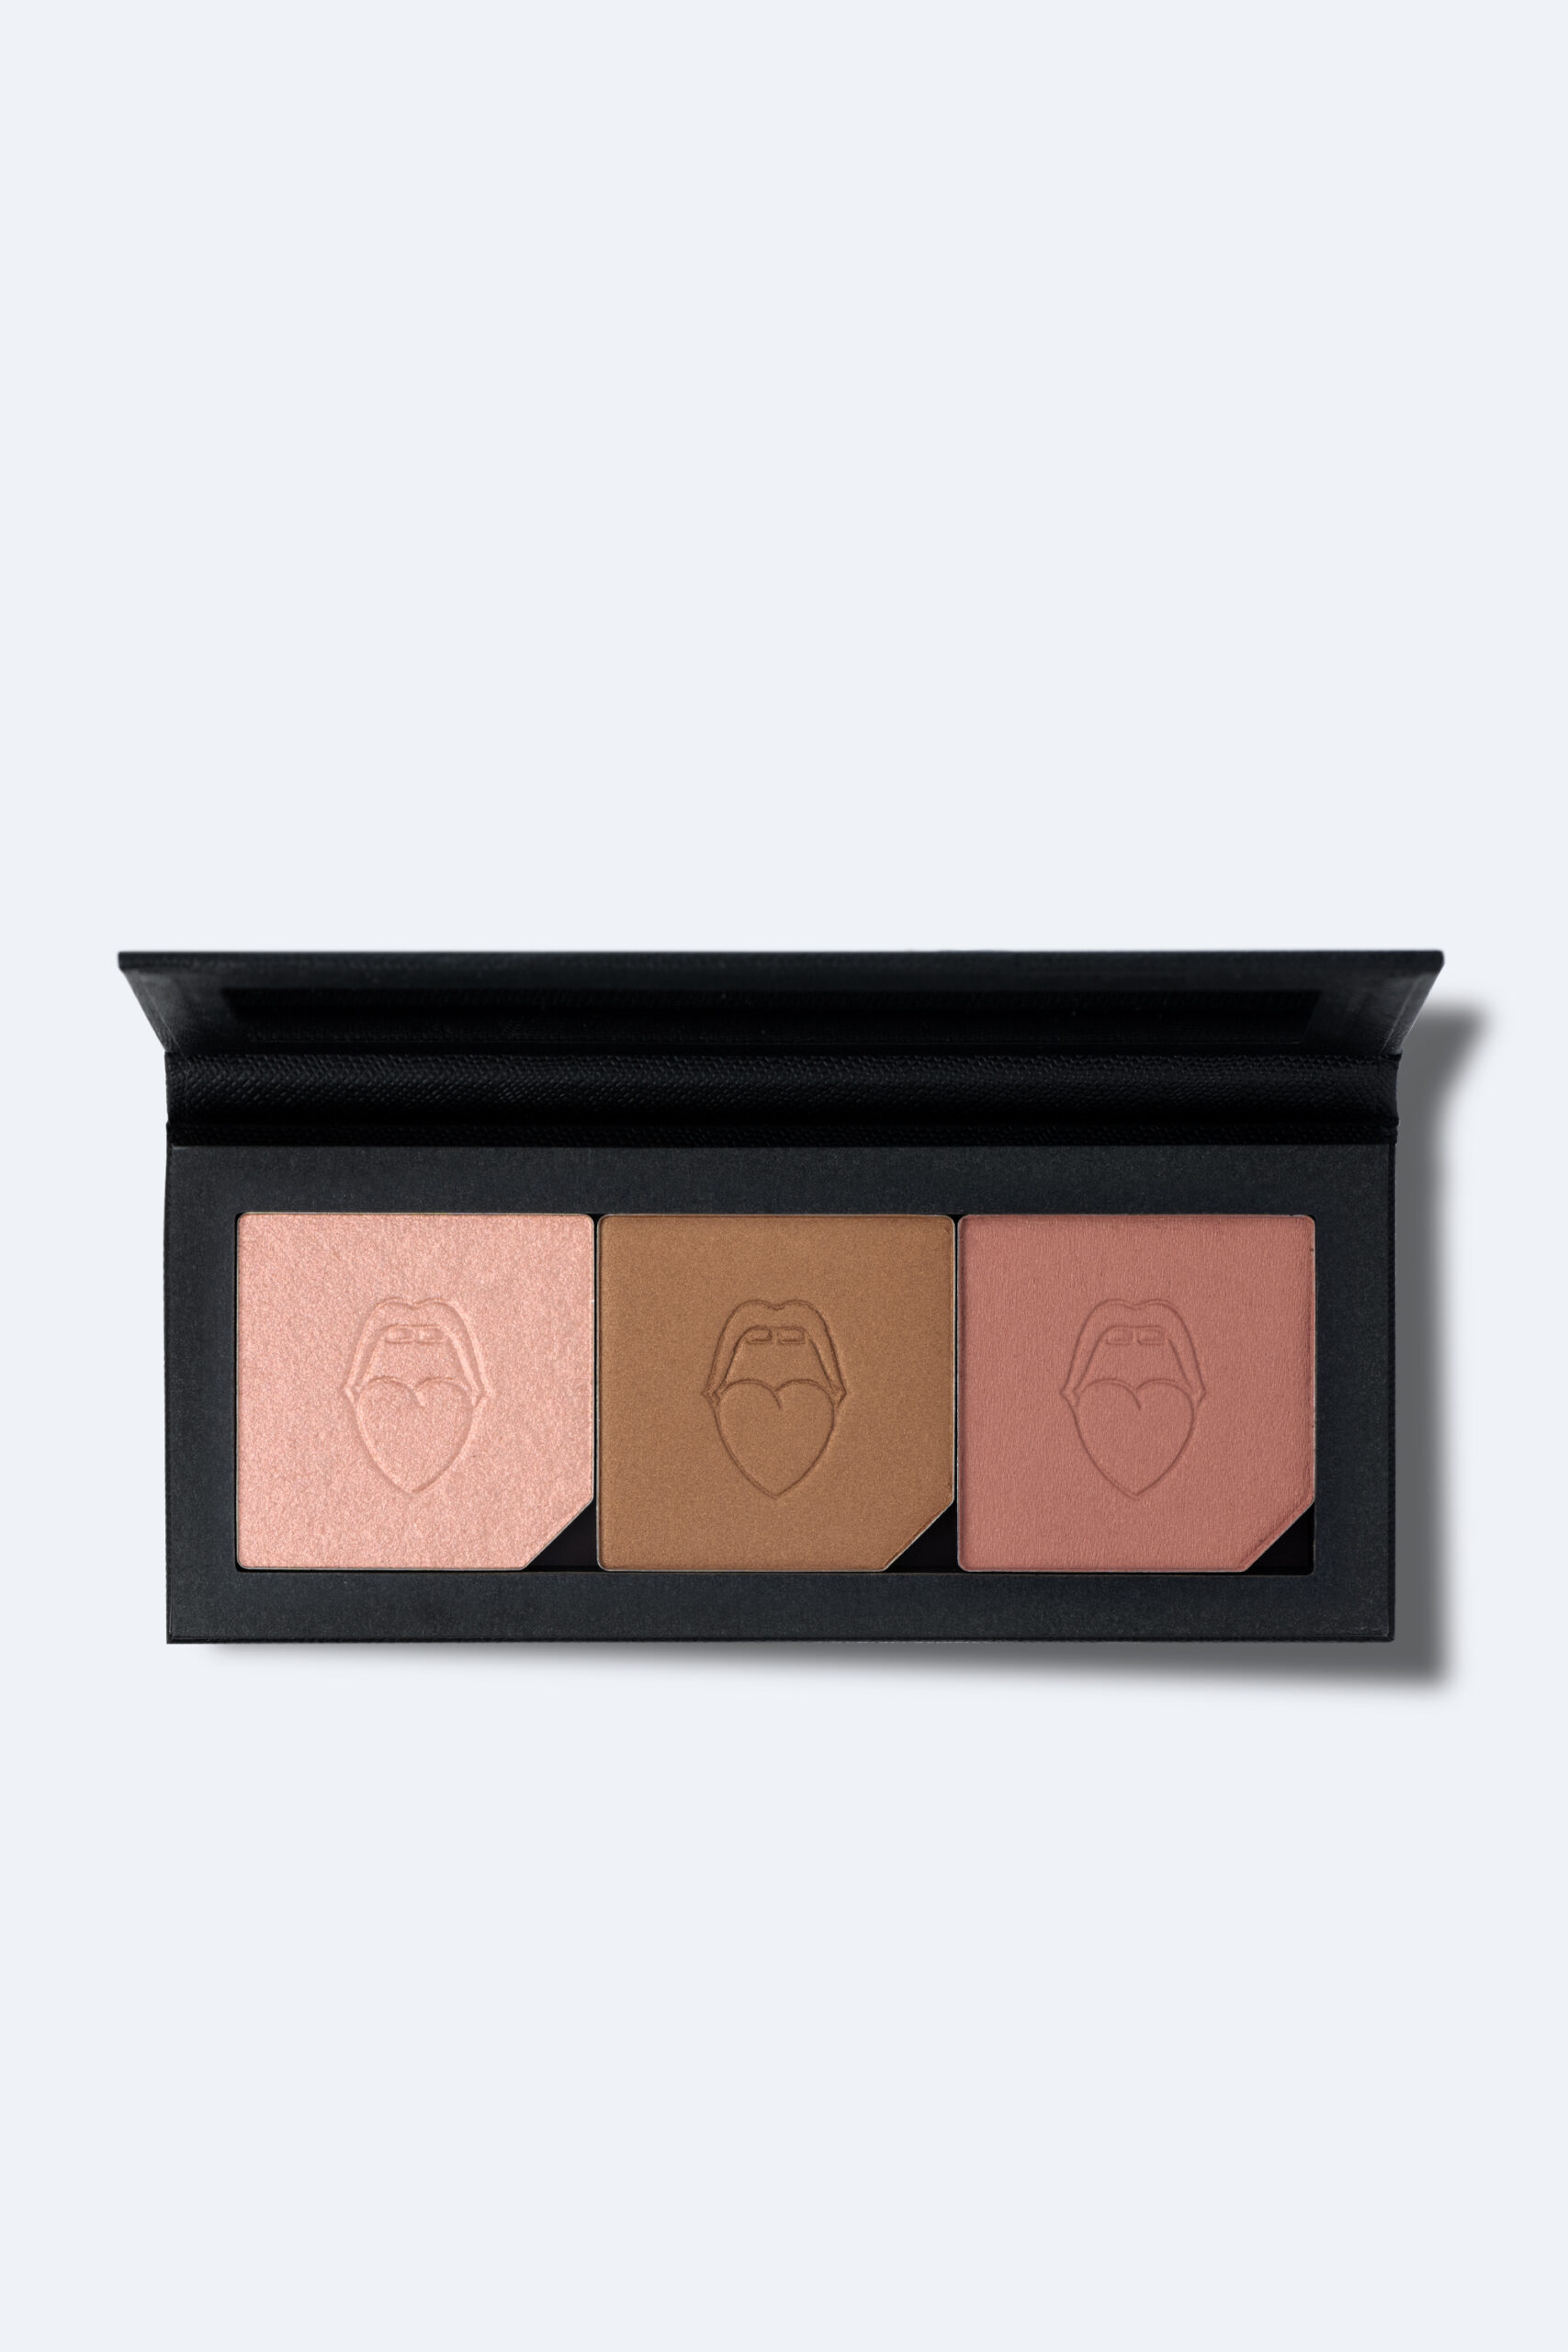 Nasty Gal Beauty Face Palette Trio 